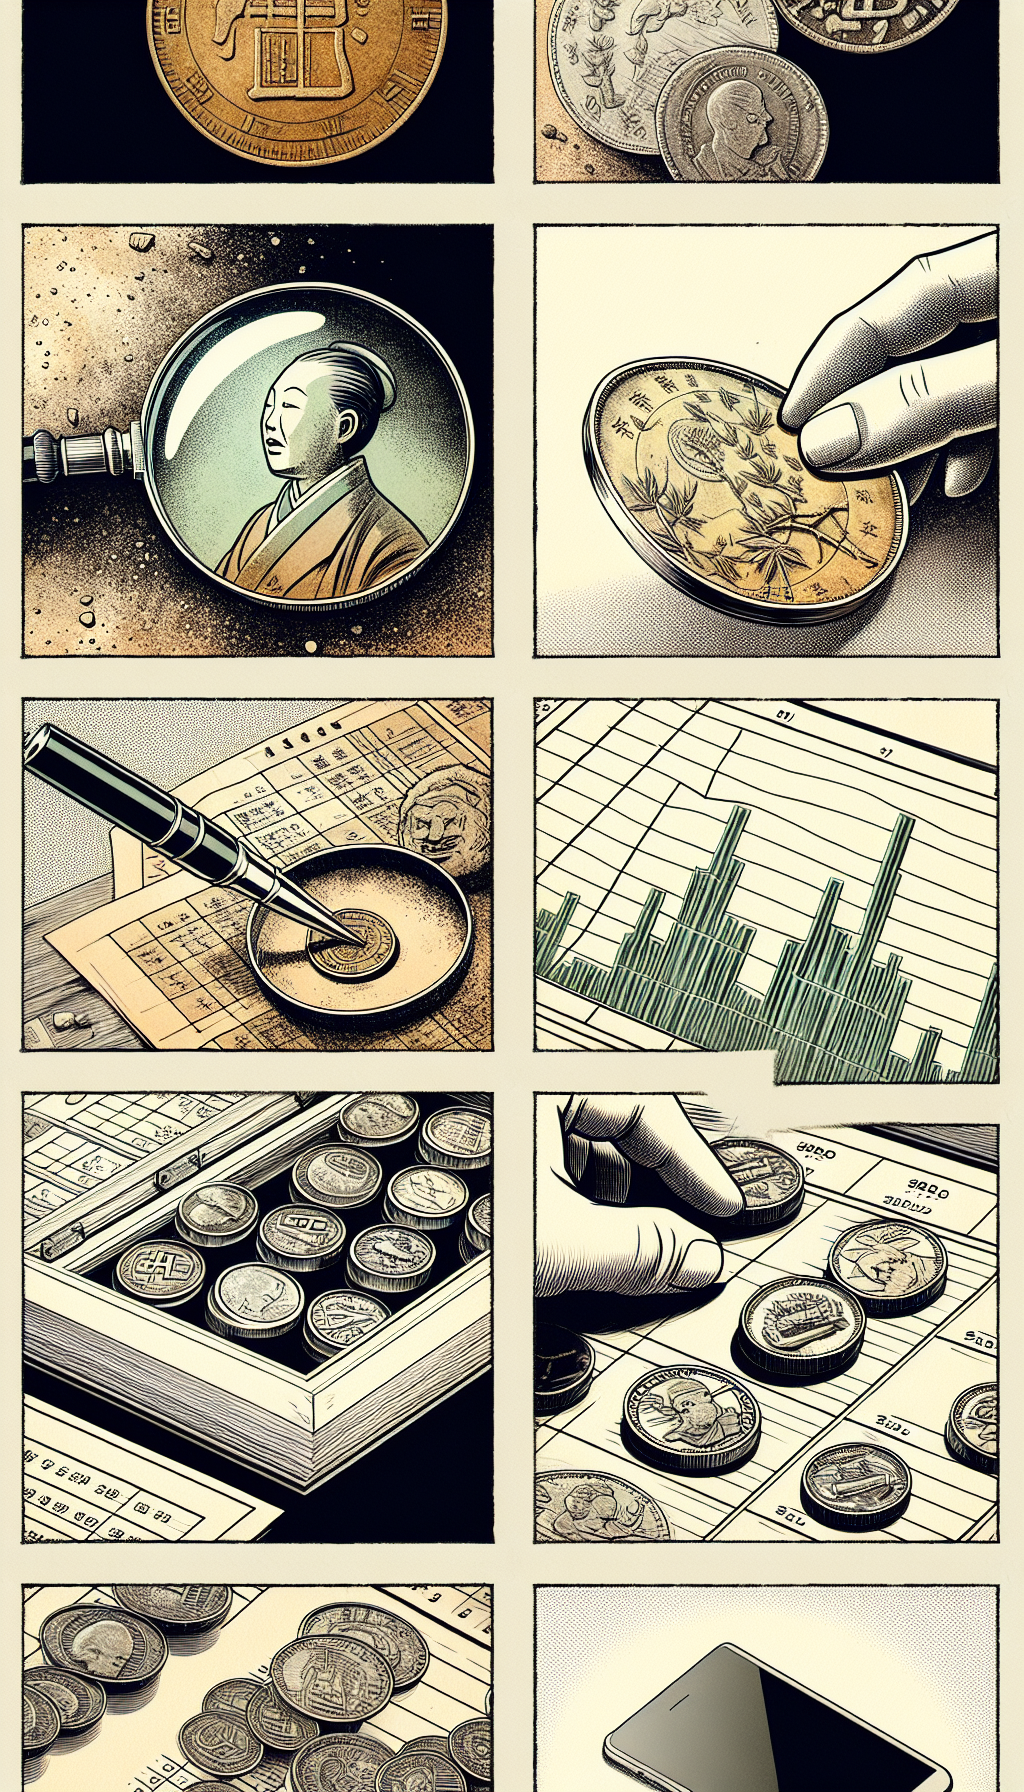 An illustration divided into comic-strip-like panels, each showcasing a distinct, whimsical style—from watercolor to ink sketch. One panel shows a magnifying glass hovering over a pristine old Chinese coin, another features a hand placing a coin into an airtight display case, while a third depicts a ledger with rising graphs beside ancient coins, symbolizing increasing value.